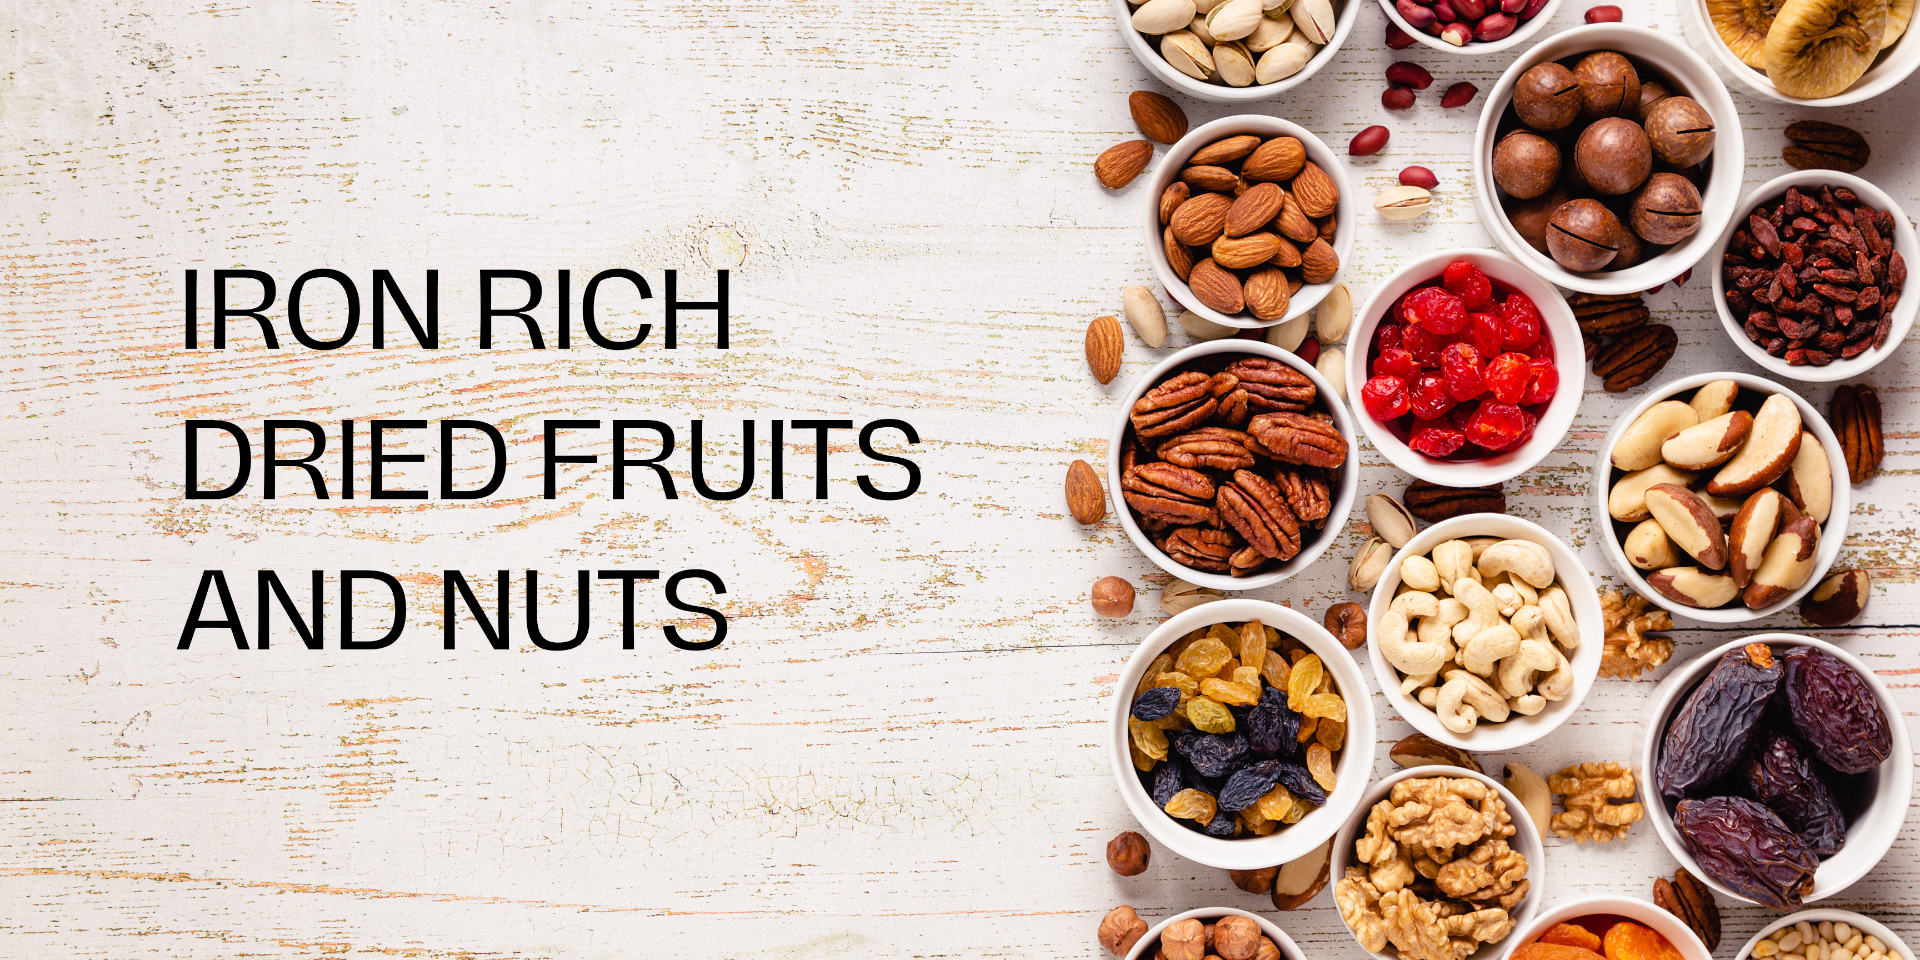 Does Your Diet Include These 5 Iron-Rich Dried Fruits and Nuts?